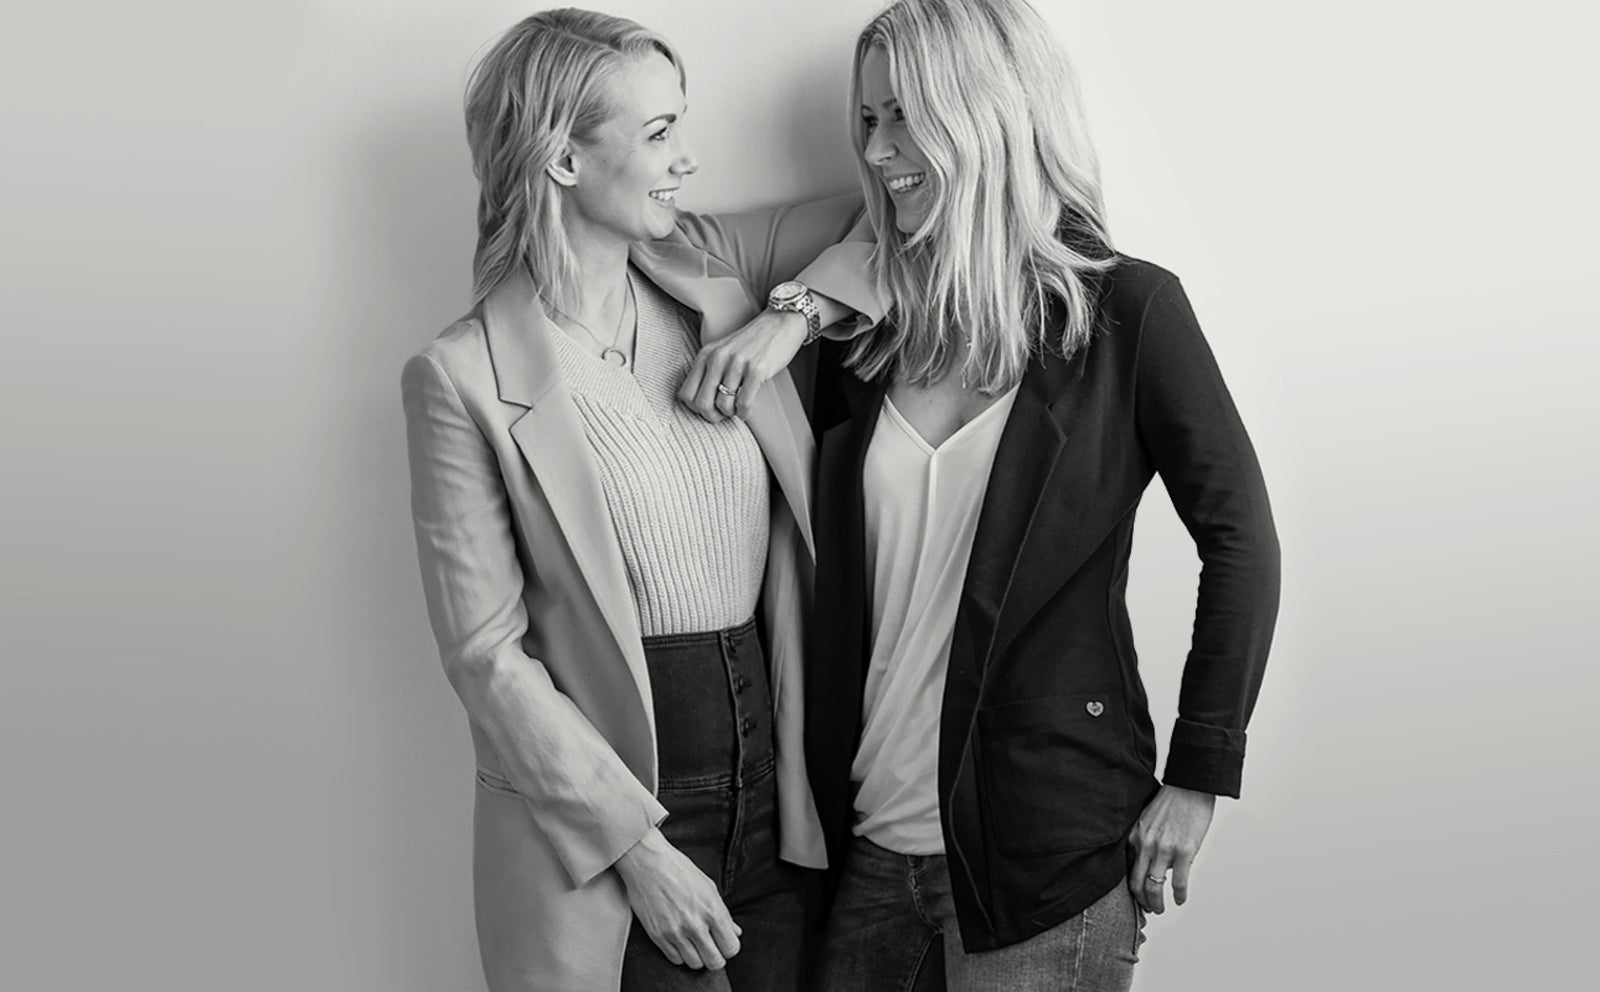 Lola&Lykke's founders - Laura on the left and Kati on the right